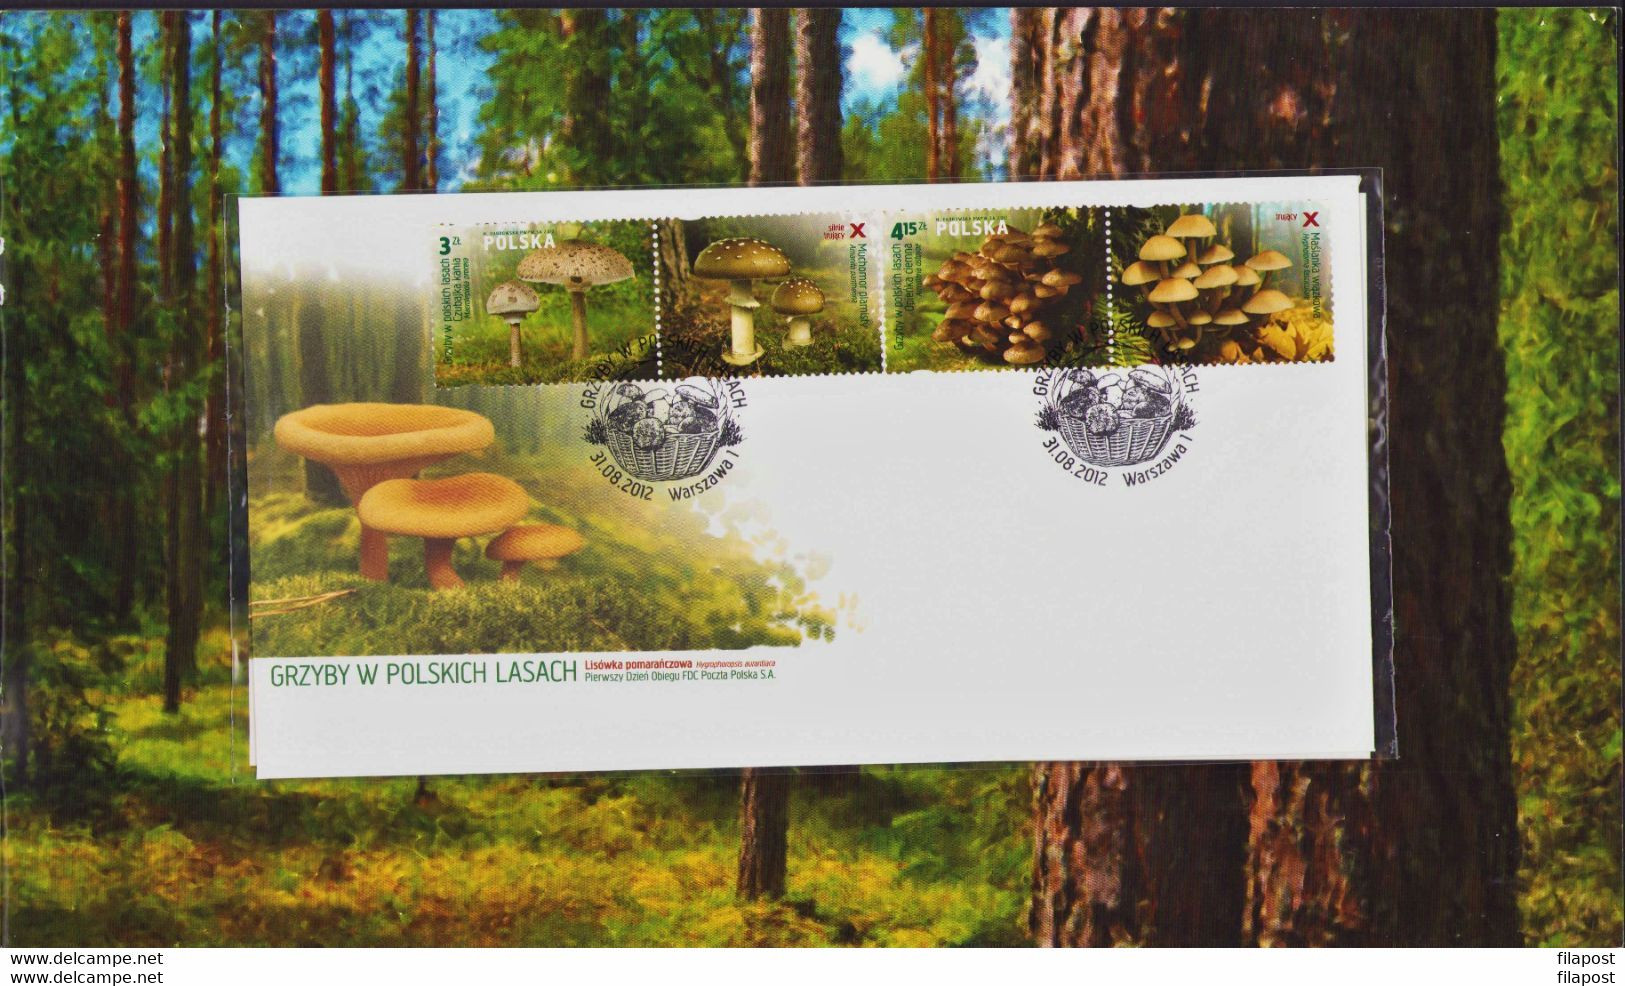 POLAND 2012 Booklet / Edible And Poisonous Mushrooms In Polish Forests / Full Sheet MNH** + 2 X FDC FV - Markenheftchen